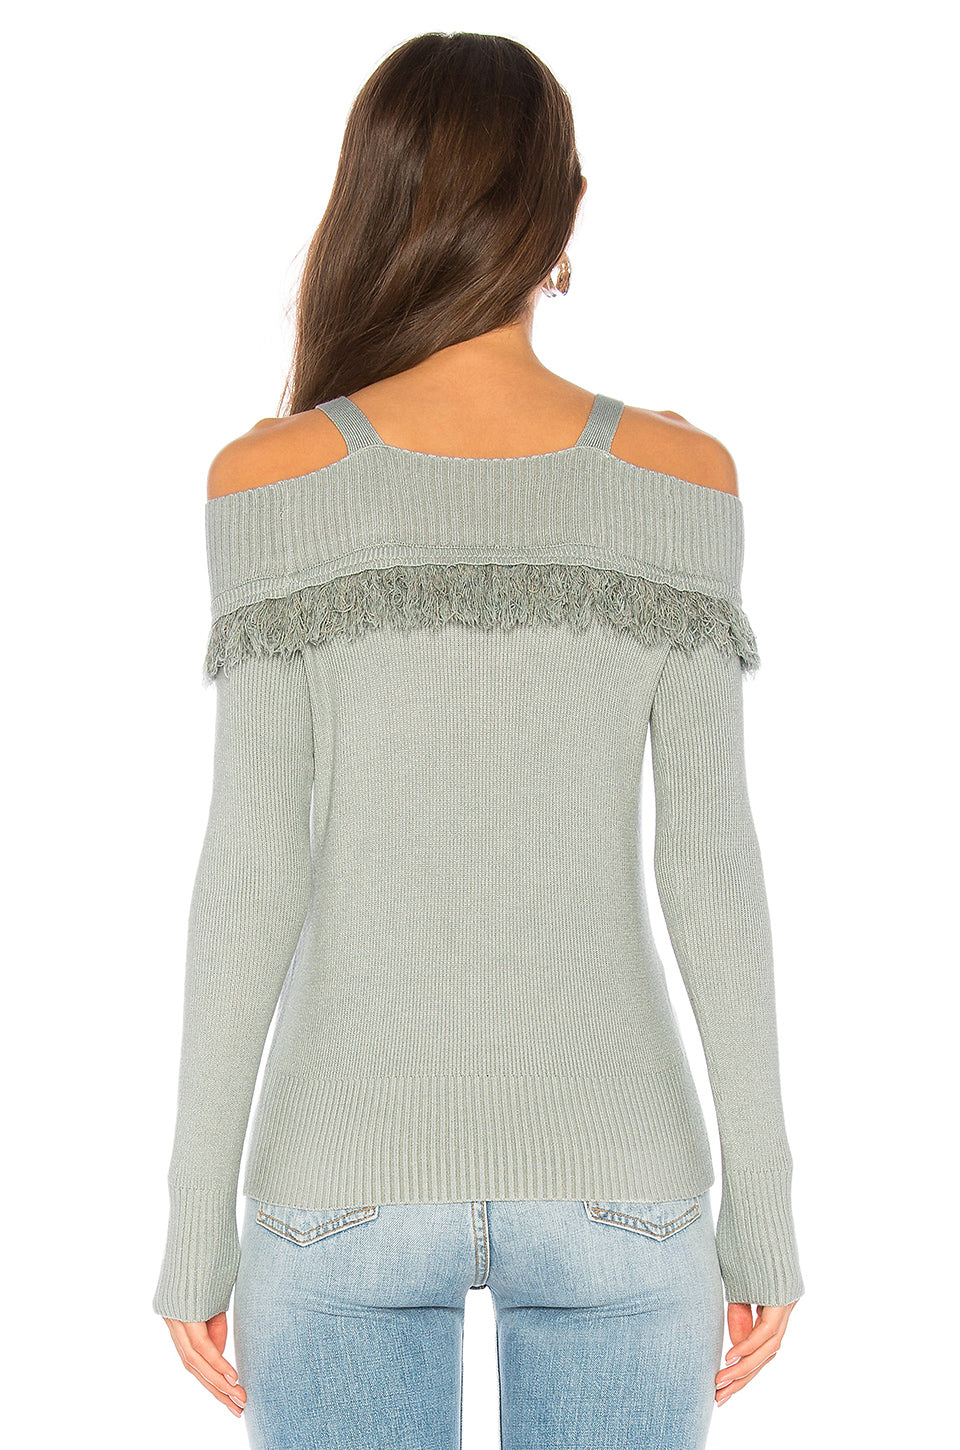 Cannes Sweater in DUSTY SAGE